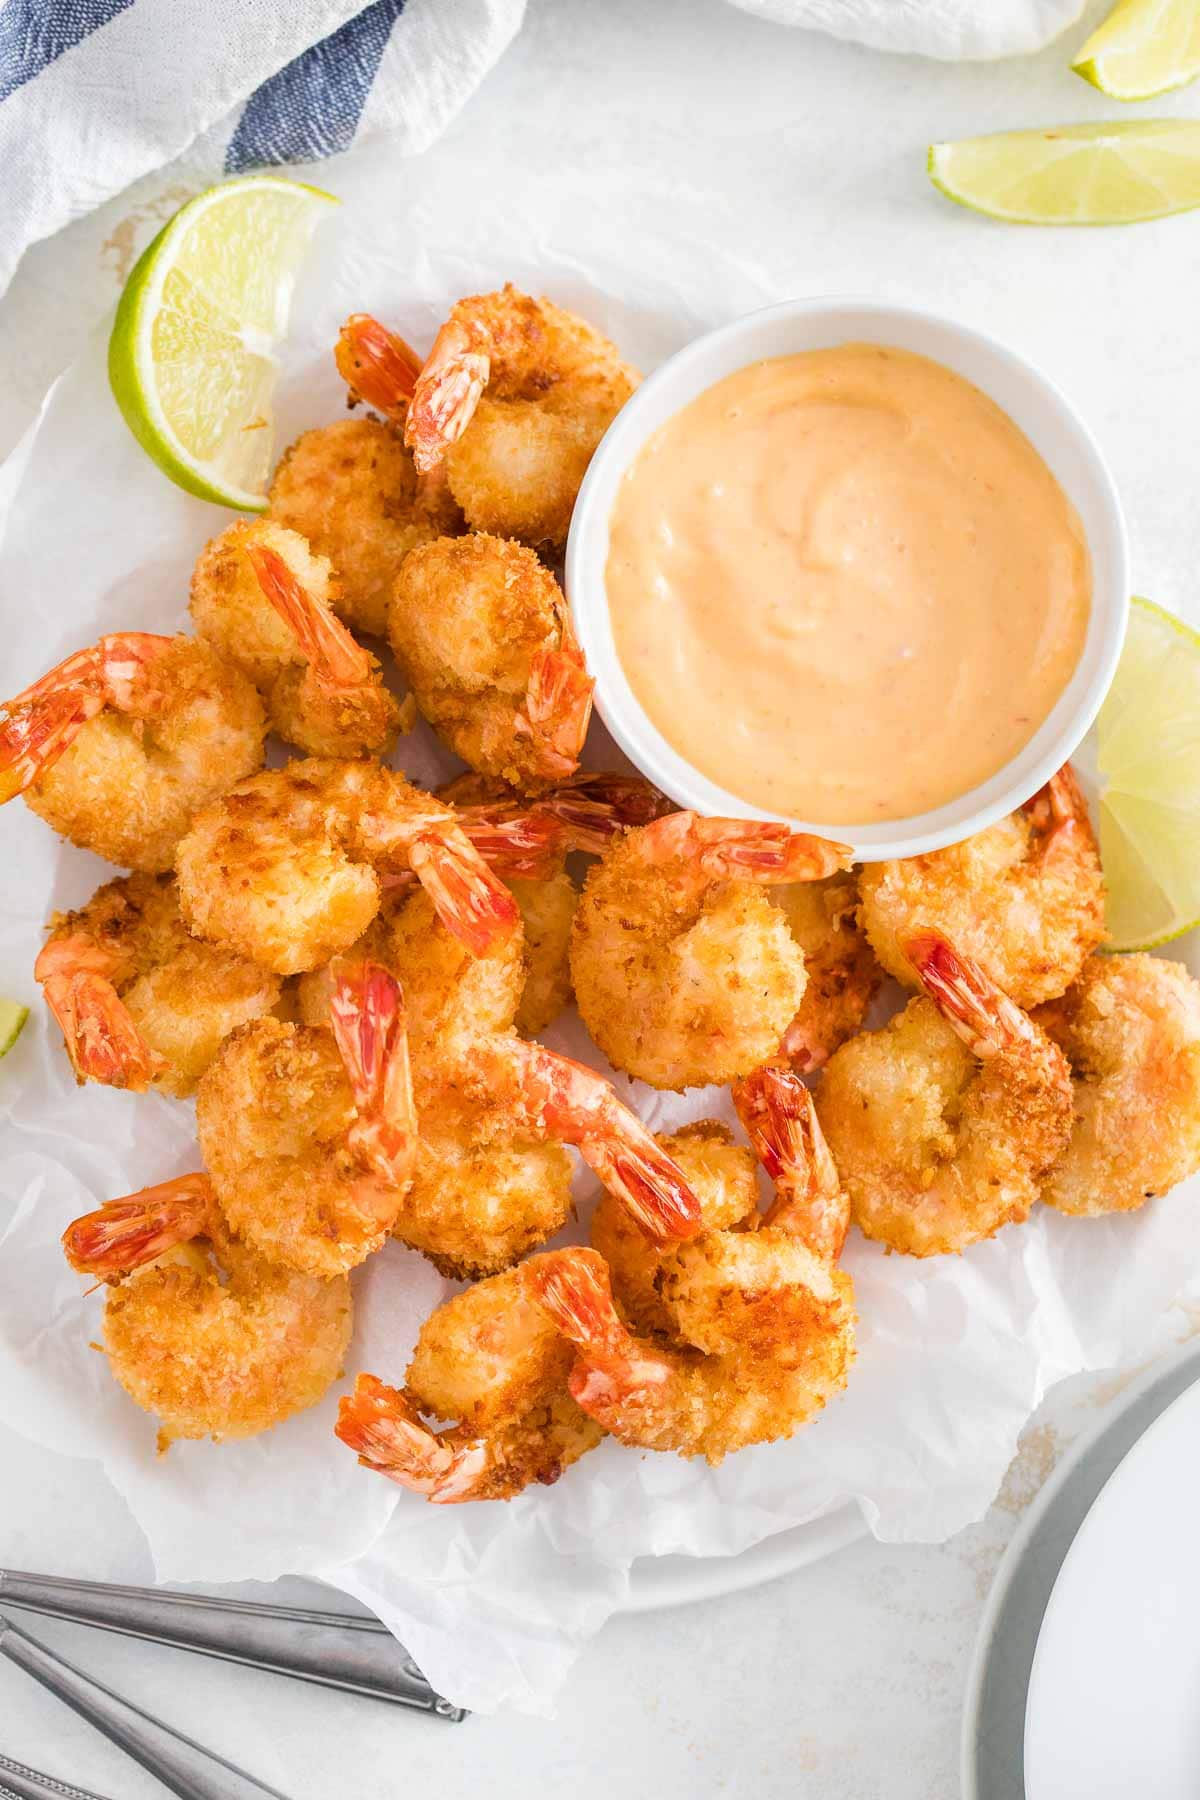 Breaded shrimps on white parchment paper next to a small white bowl of sauce.